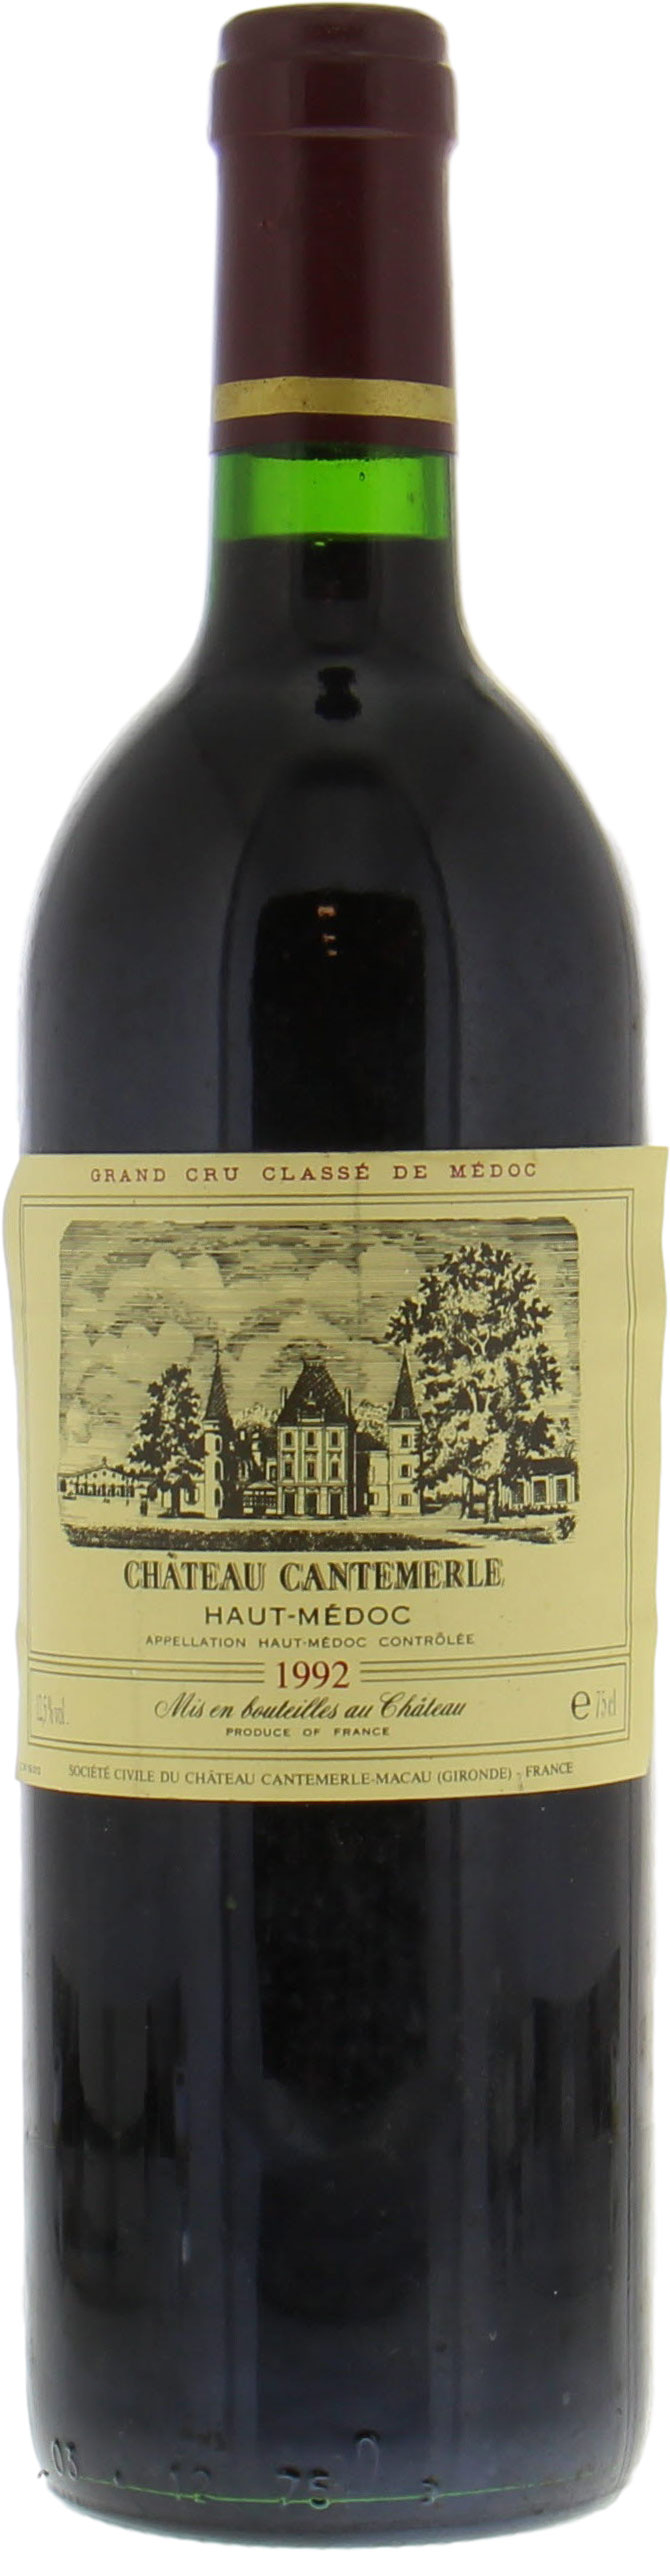 Chateau Cantemerle - Chateau Cantemerle 1992 Labels slightly loose